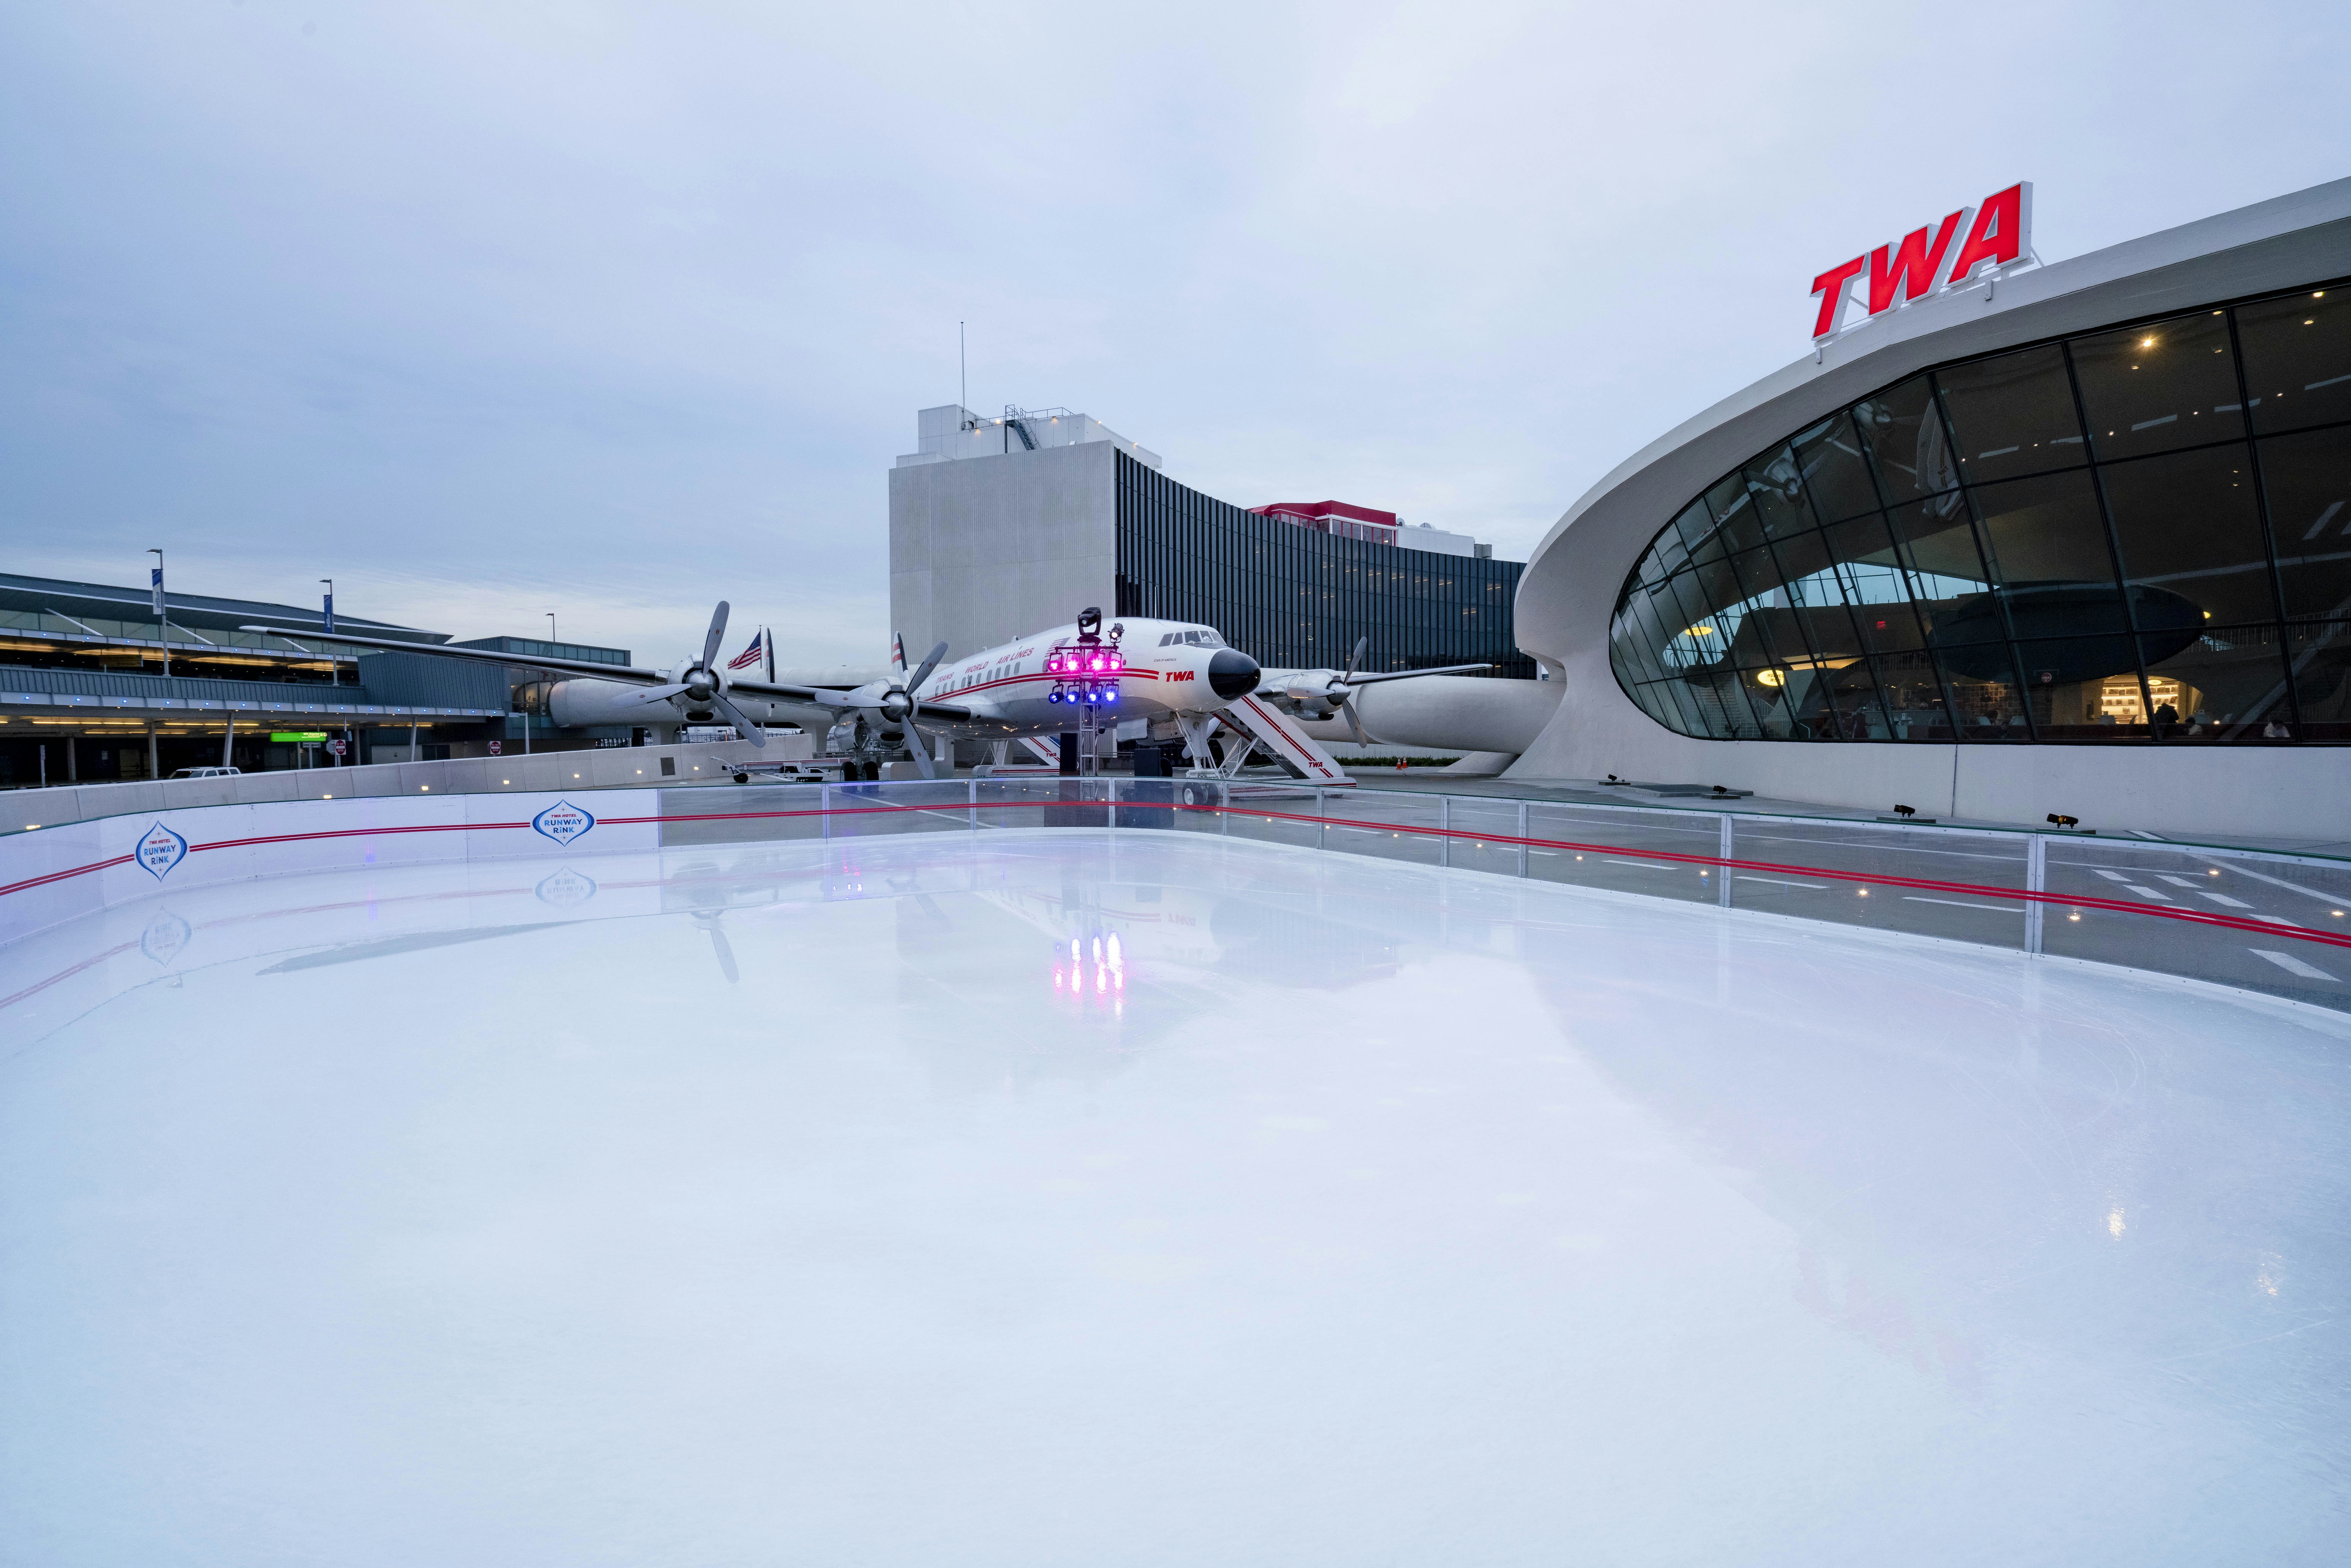 The ice skating rink by the runway at the TWA Hotel 